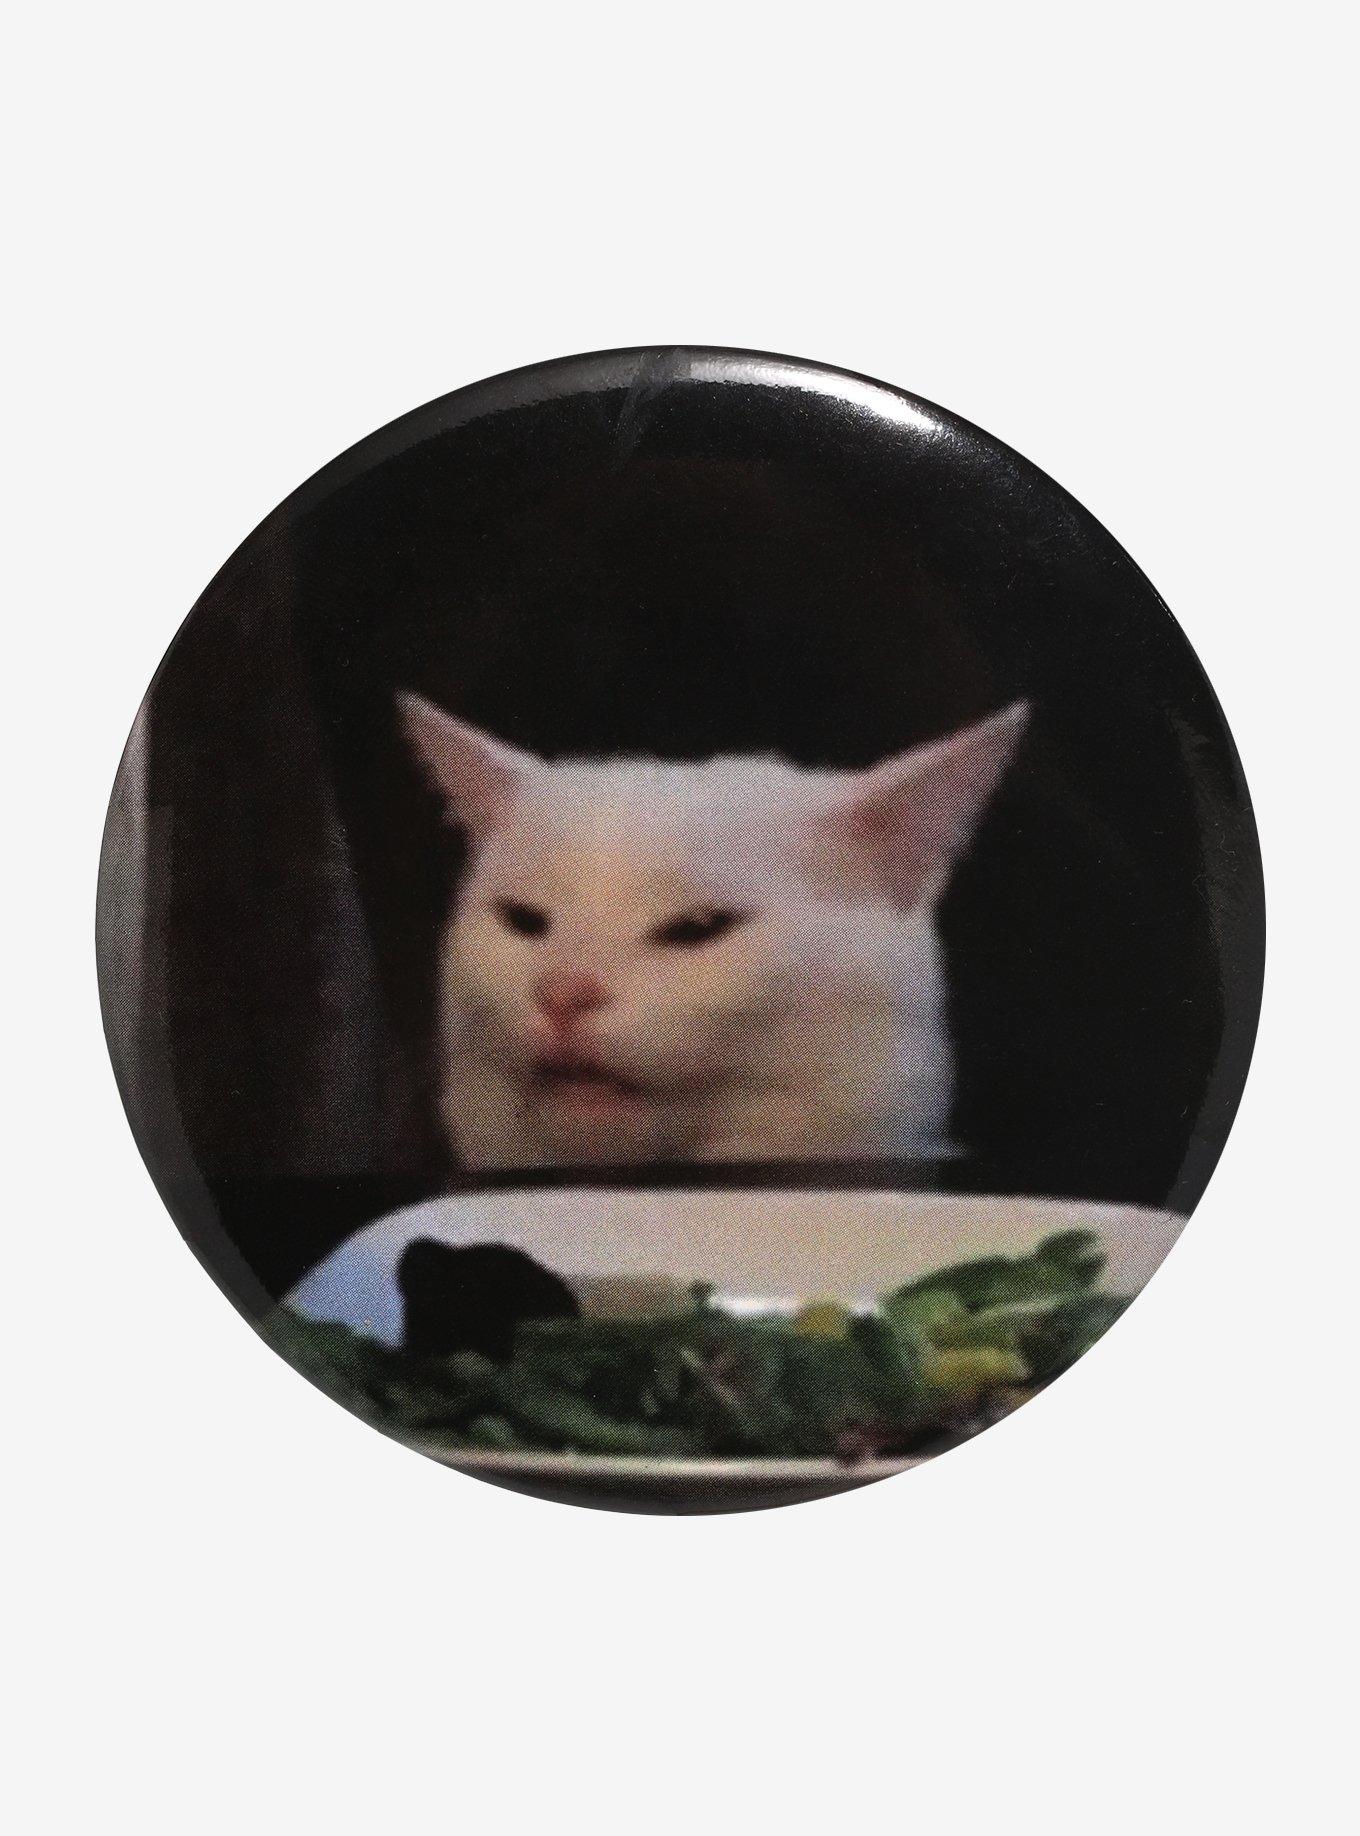 Angry women yelling at confused cat dinner table meme ugly for